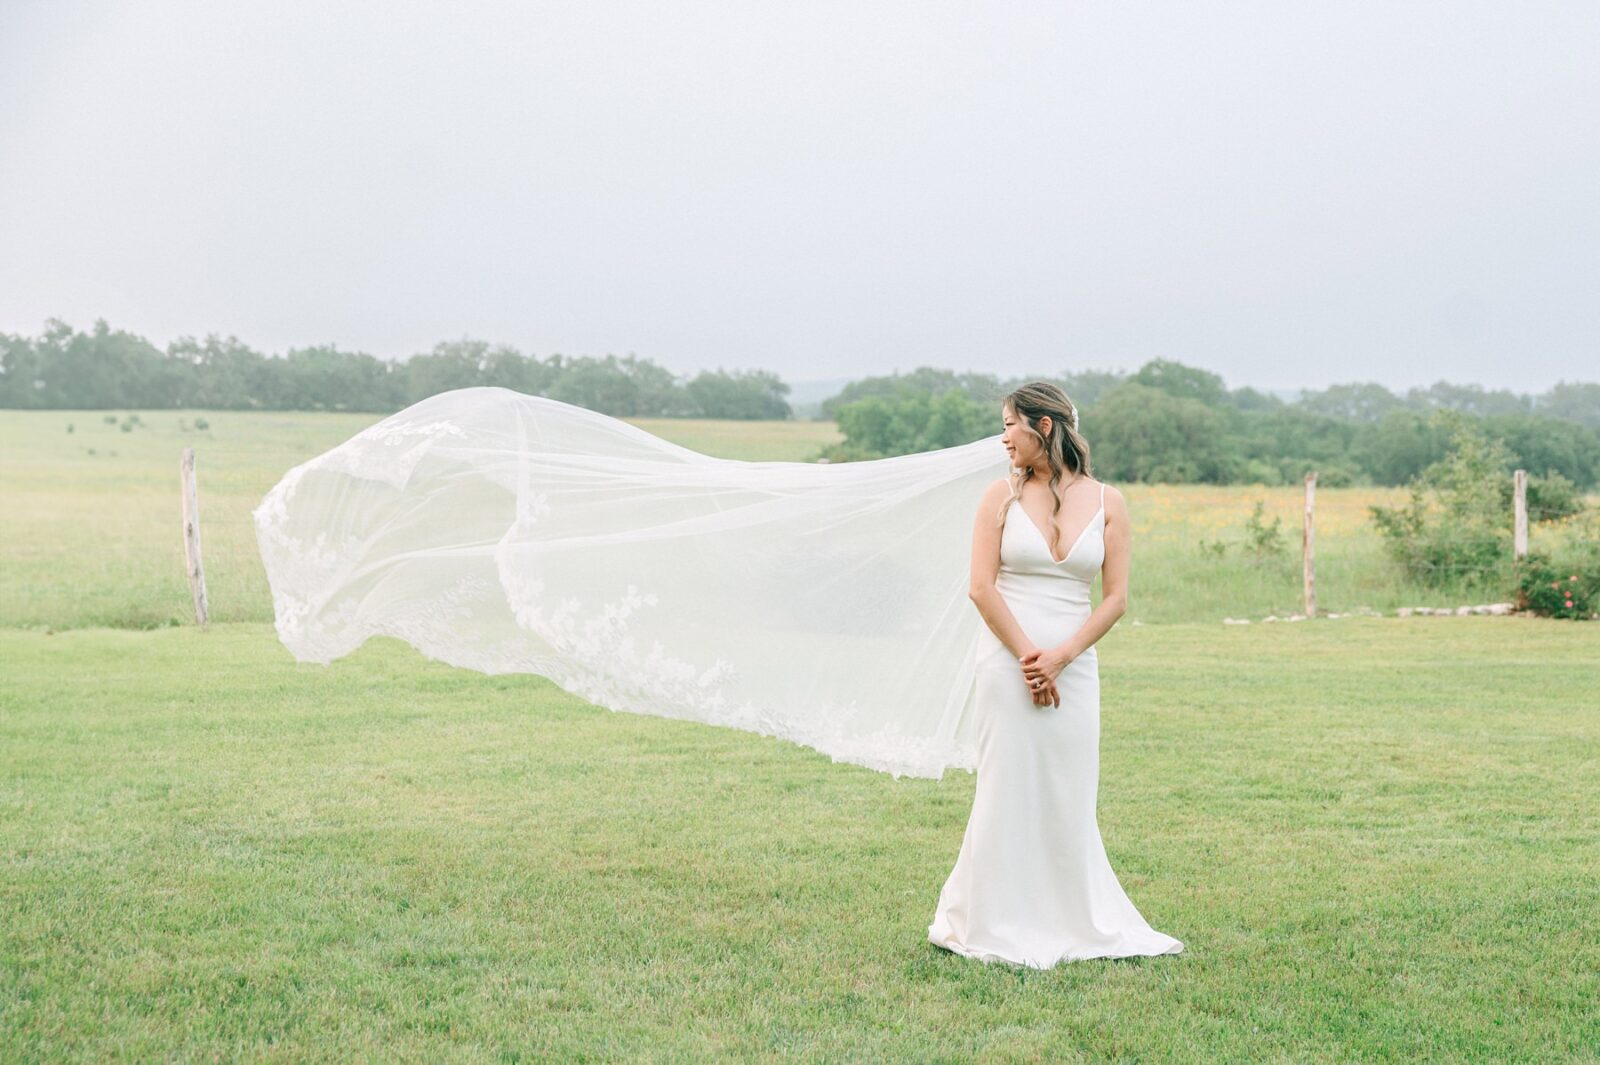 bride with veil blowing in the wind, bridal veil photo, bride and groom formal photos, formal photos at stonehouse villa, stonehouse villa wedding photos, stonehouse villa, wimberley wedding venue, tara paige weddings, austin wedding photographer